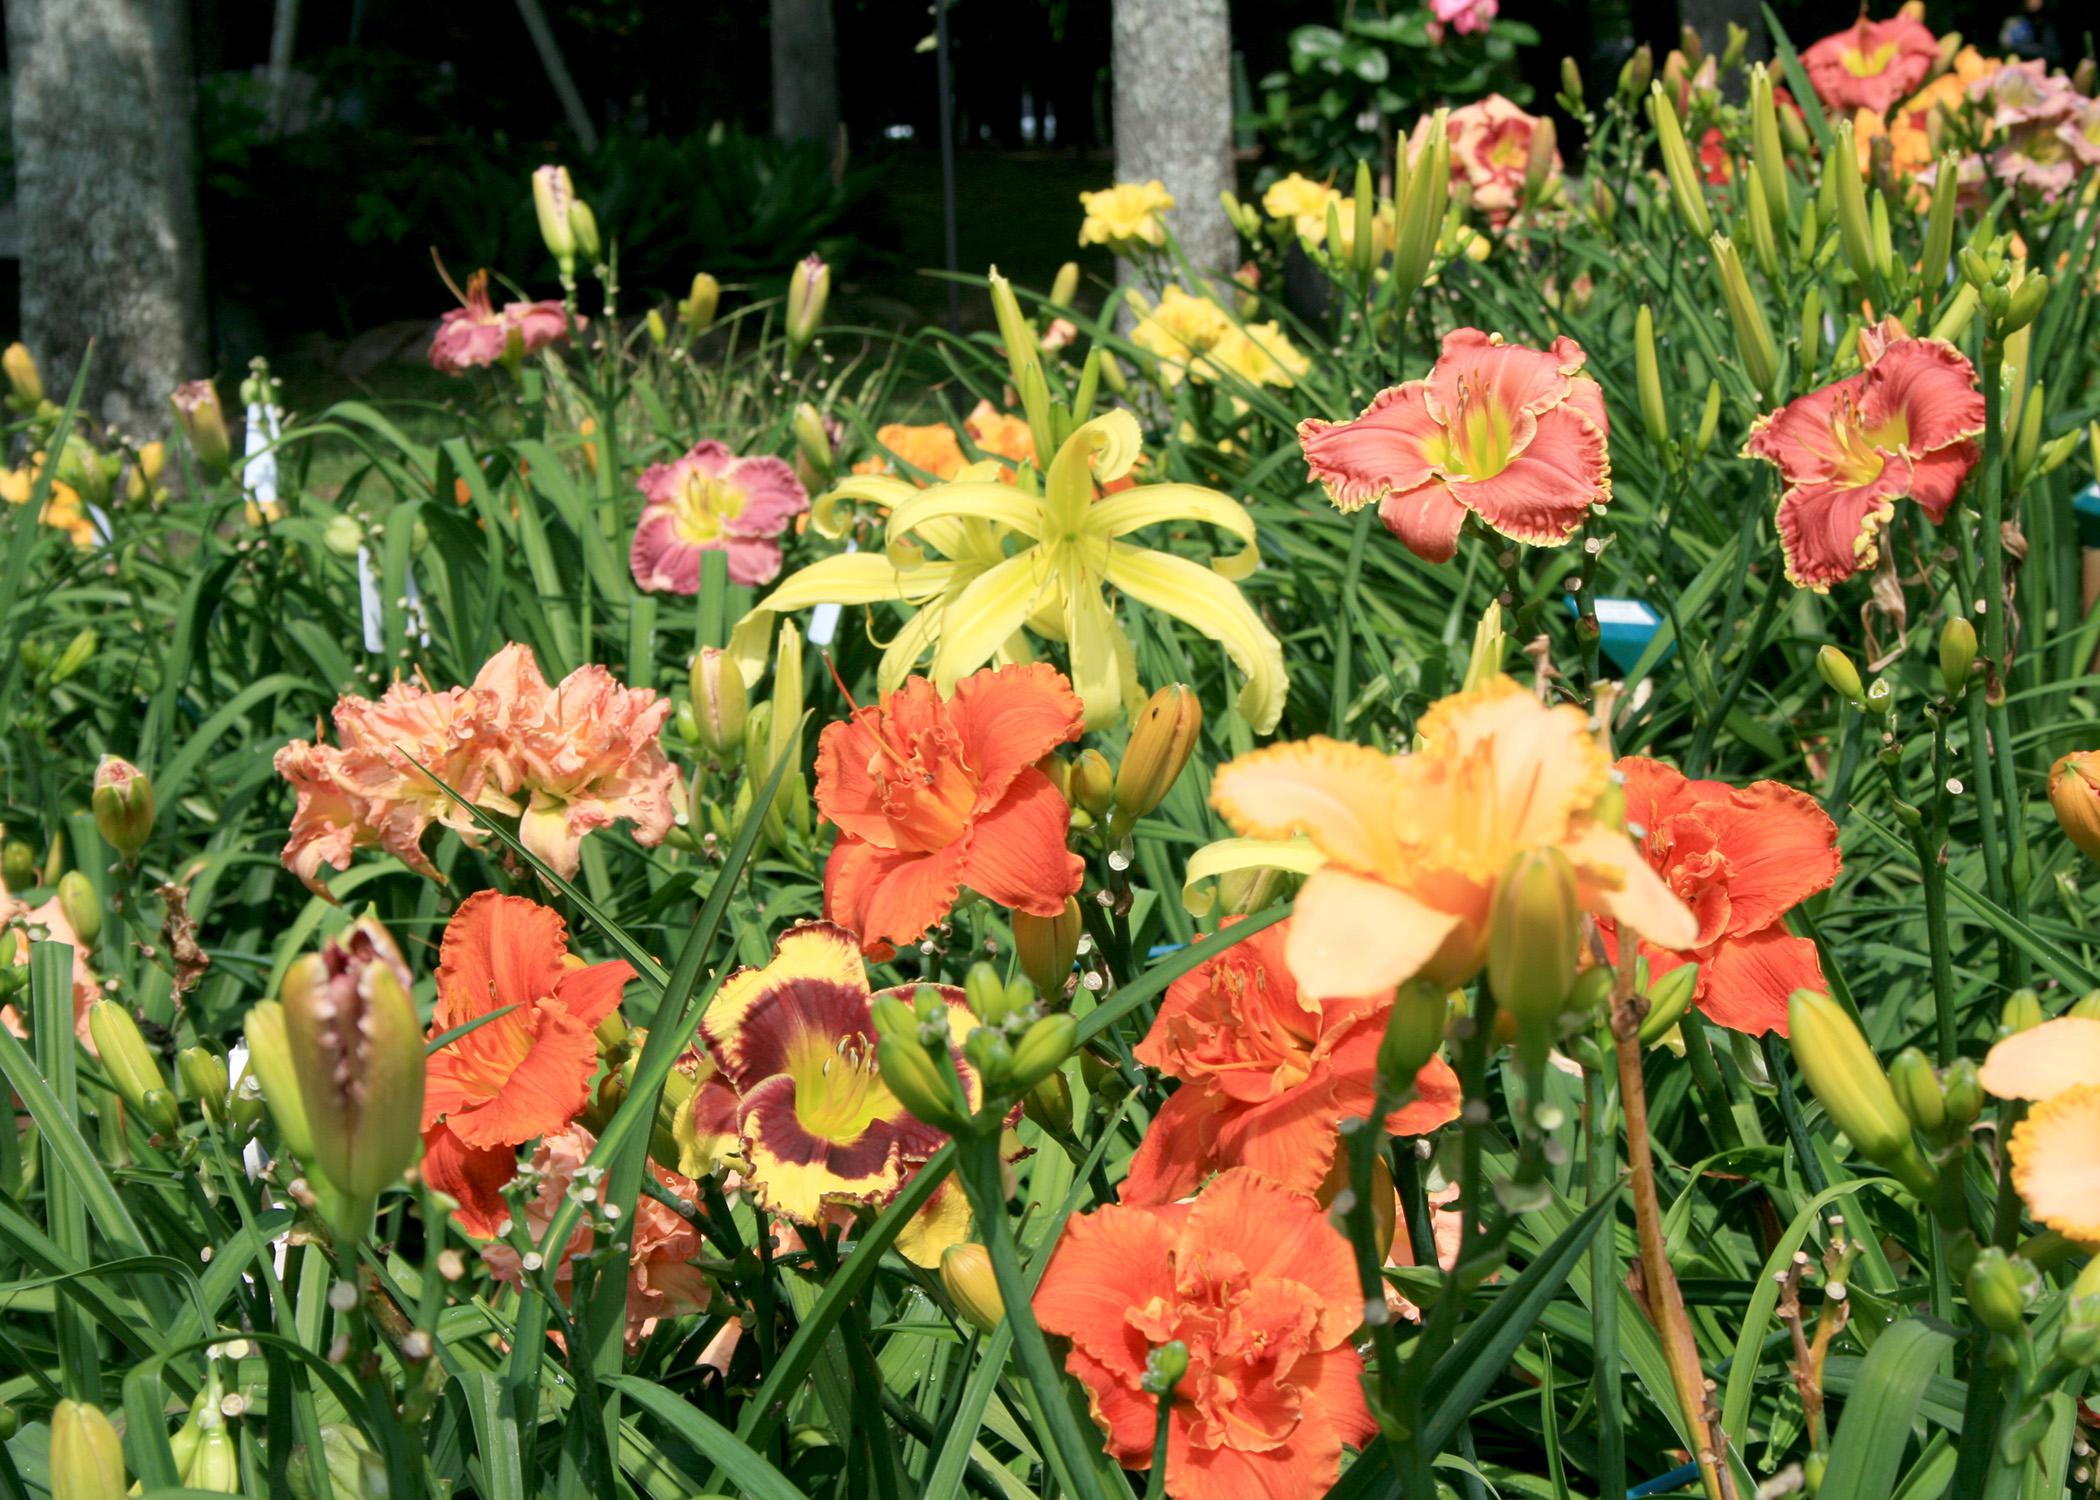 Daylilies such as these mixed varieties are ideal candidates to divide and share with neighbors or move to new areas of the landscape. (Photo by MSU Extension Service/Gary Bachman)